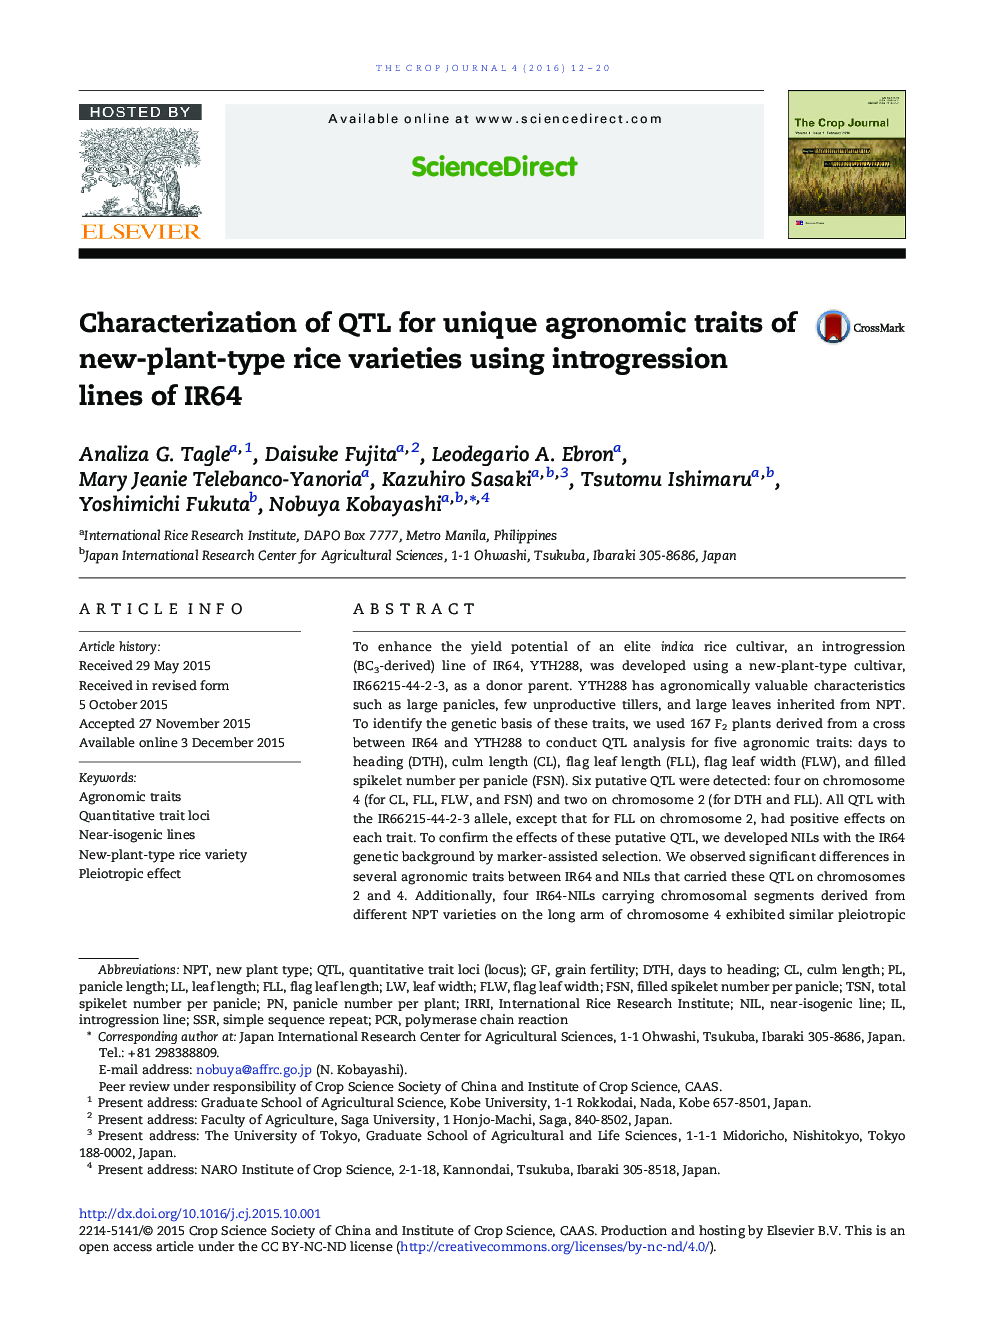 Characterization of QTL for unique agronomic traits of new-plant-type rice varieties using introgression lines of IR64 